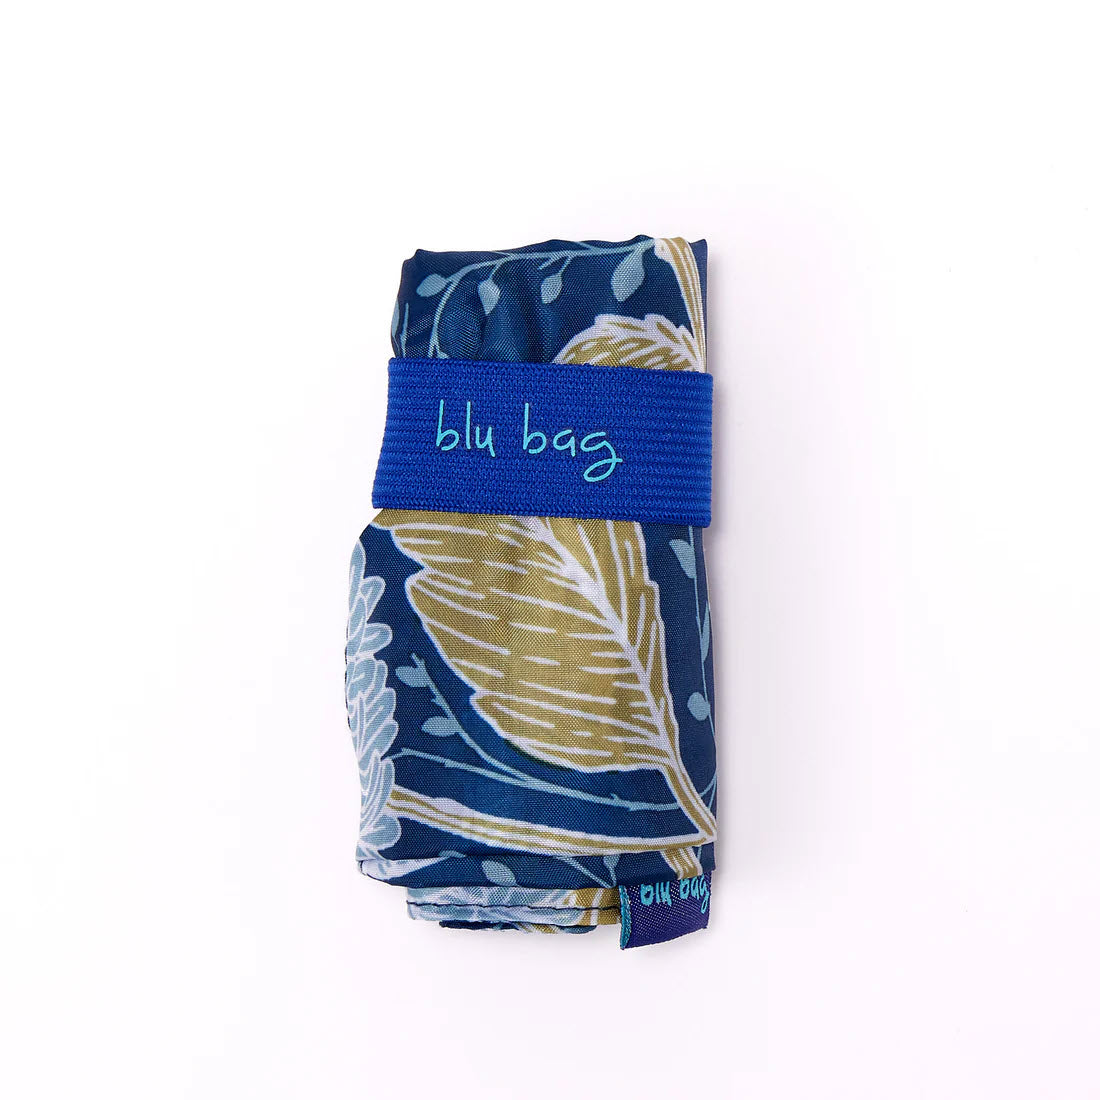 A folded blue and gold floral patterned eco-friendly tote secured with a blue strap labeled &quot;BLU BAG CHRYSANTHEMUM&quot; by Rockflowerpaper on a white background.